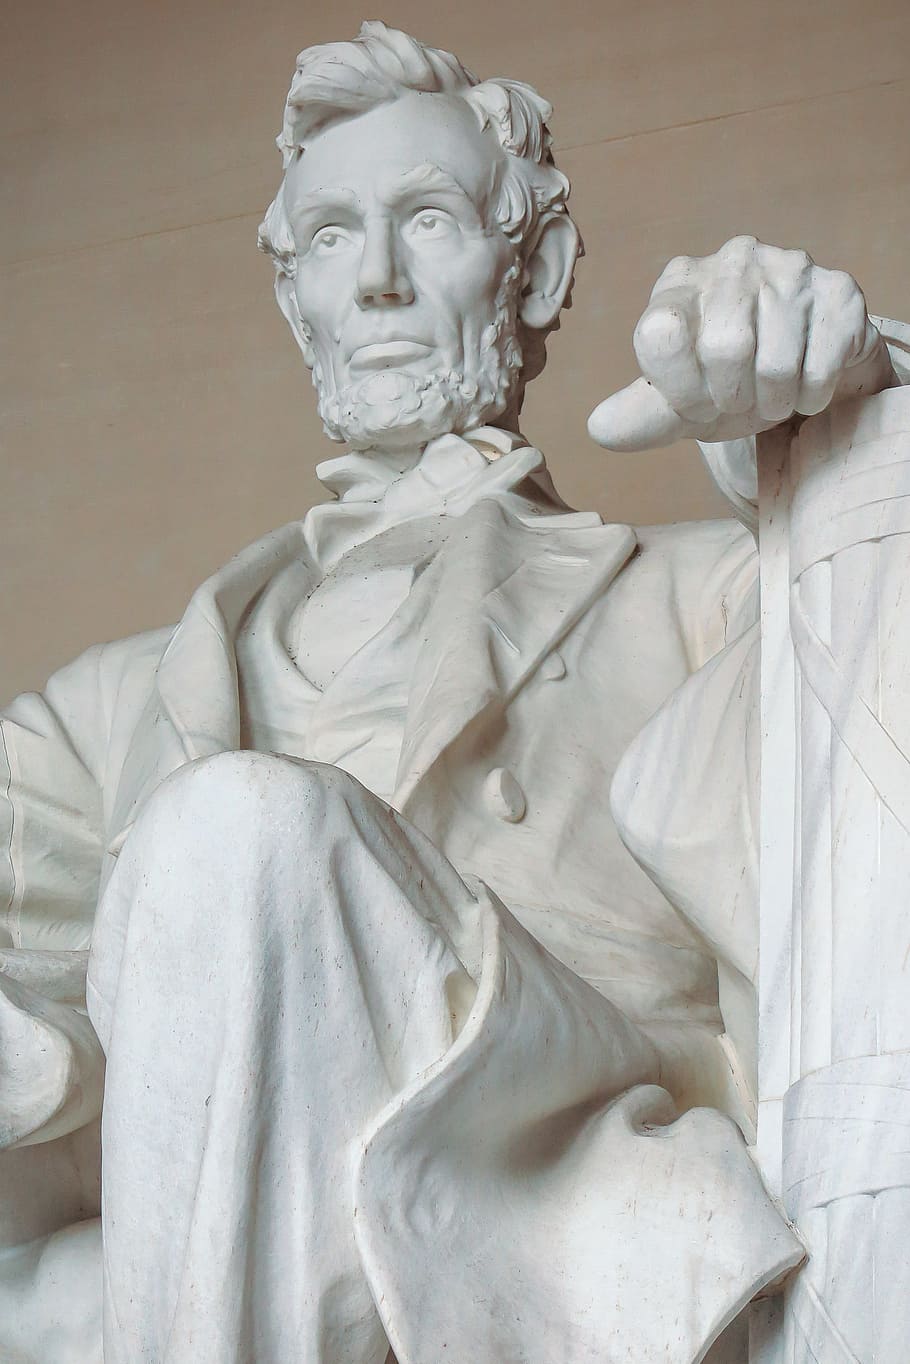 Lincoln President Of The Temple 1080p 2k 4k 5k Hd Wallpapers Images, Photos, Reviews